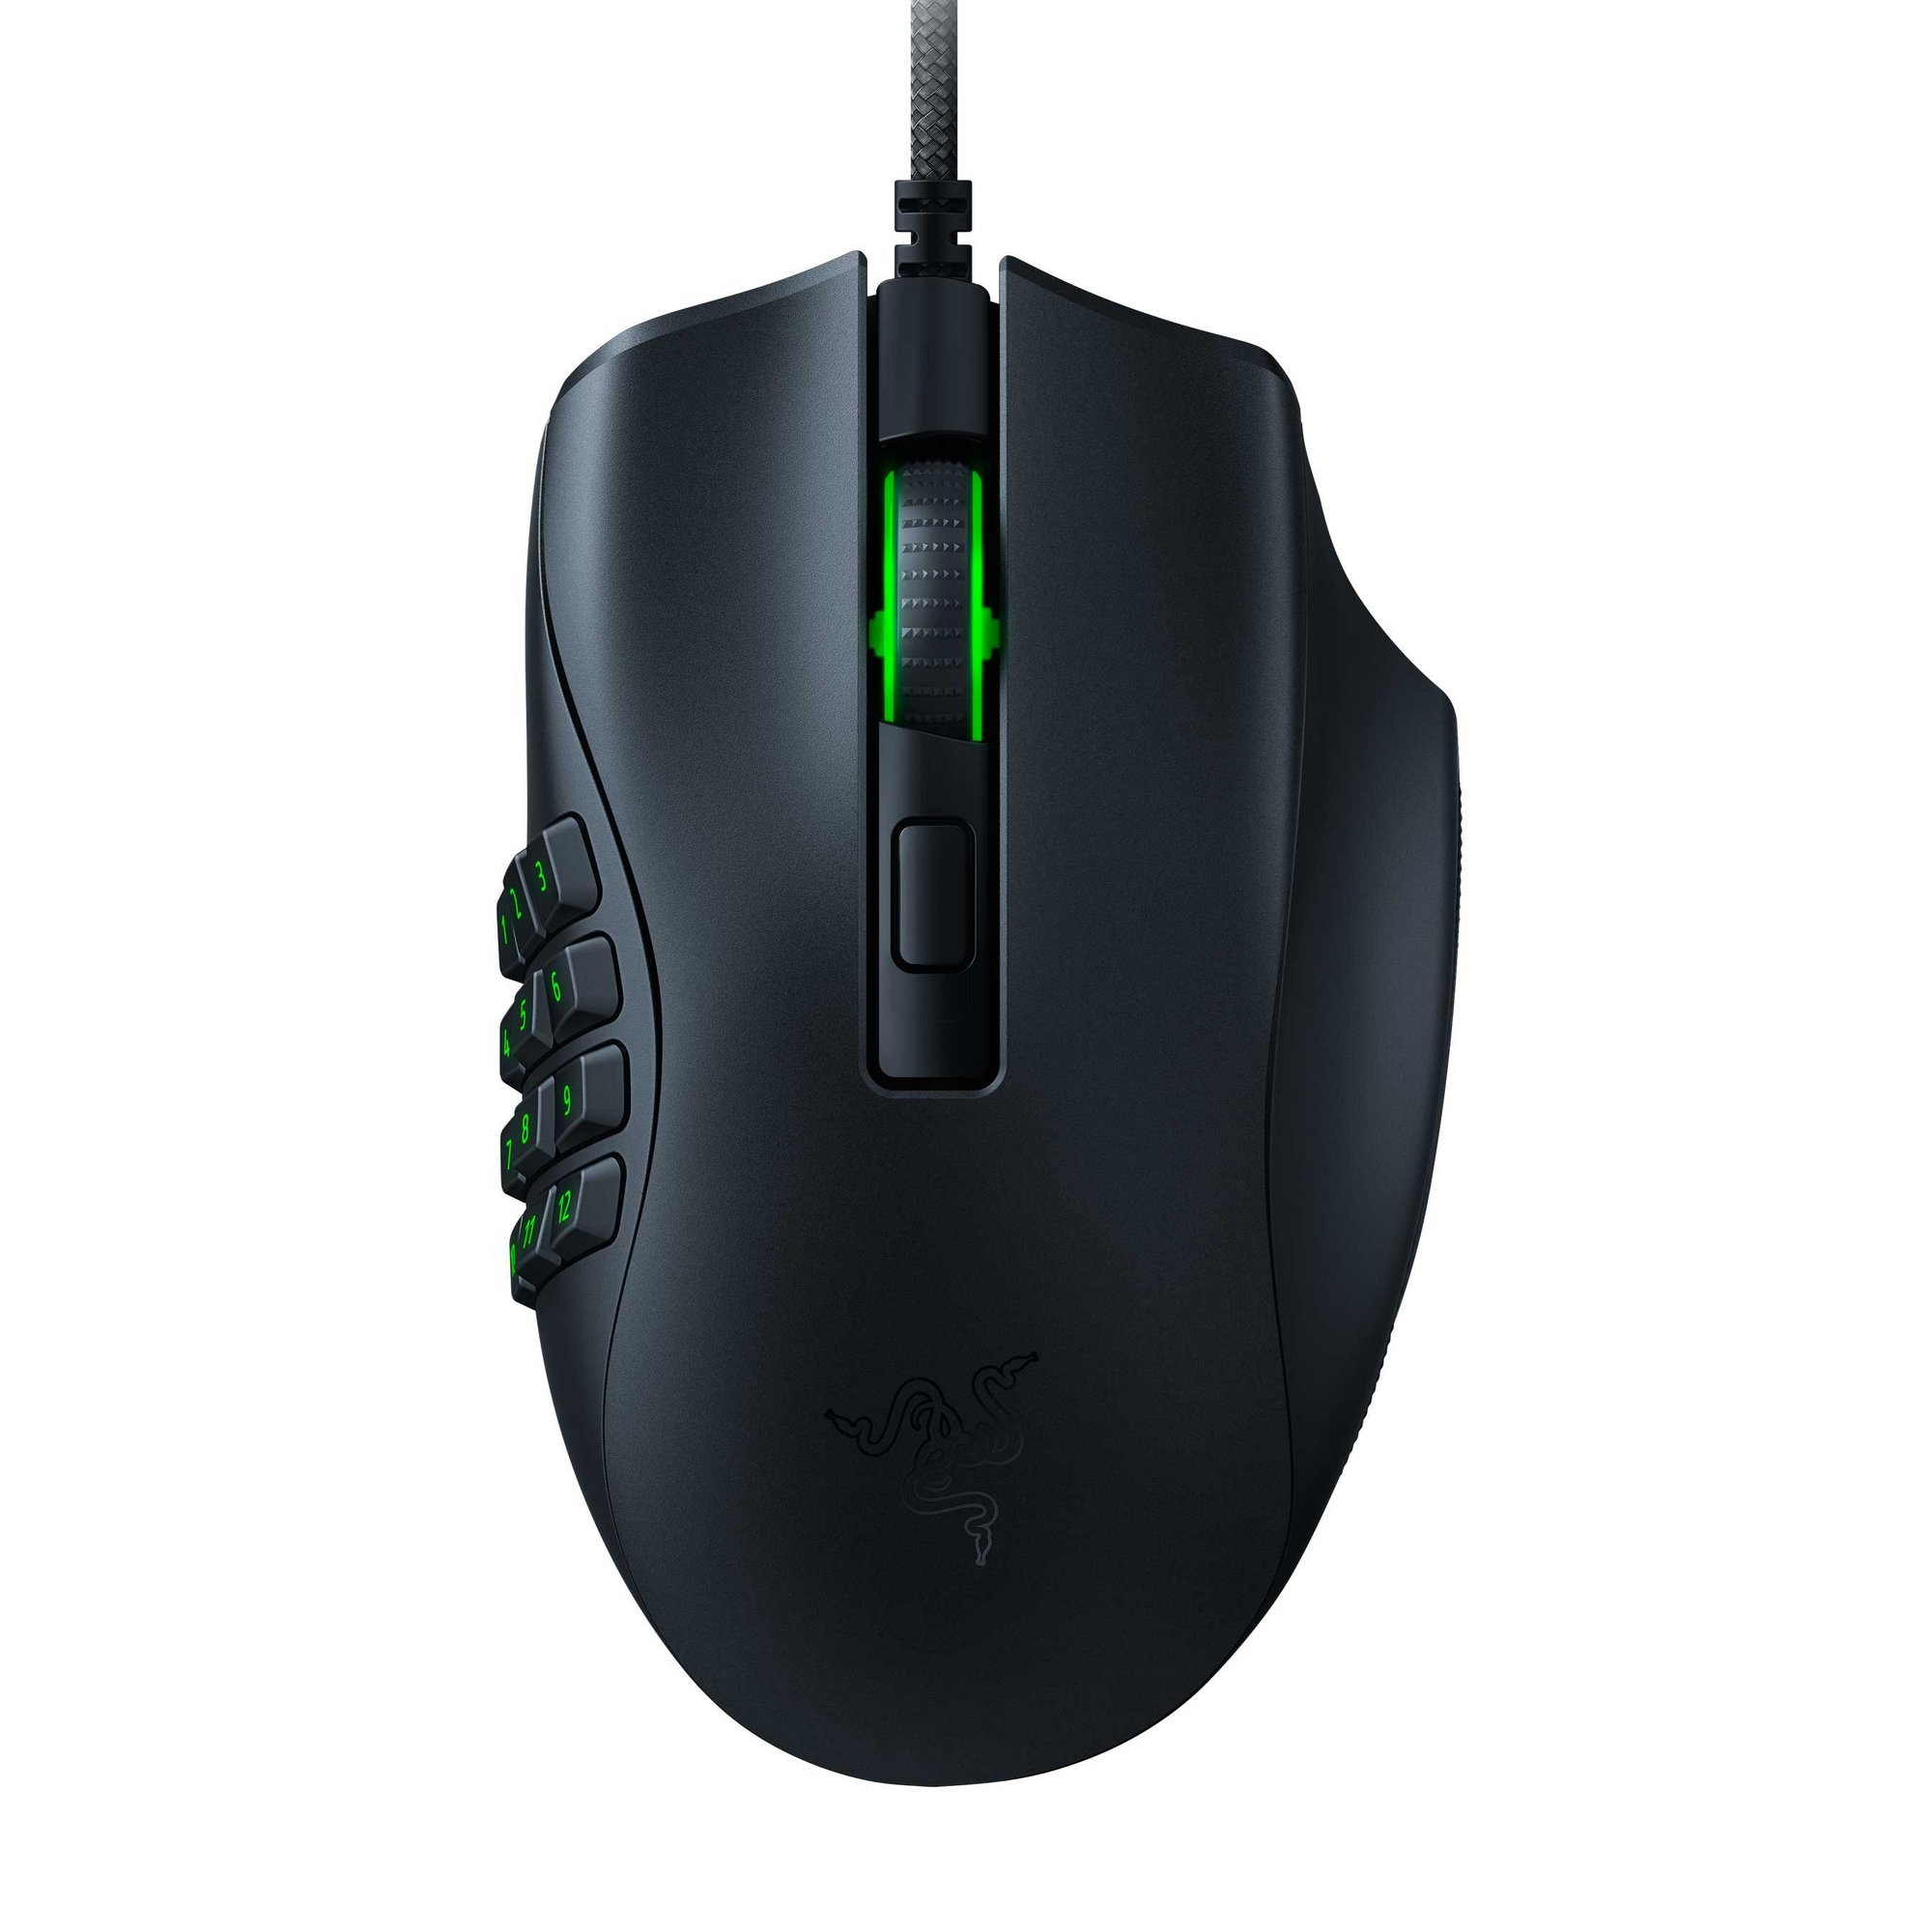 Razer Naga X Ergonomic MMO PC Gaming Mouse with 16 Programmable Buttons